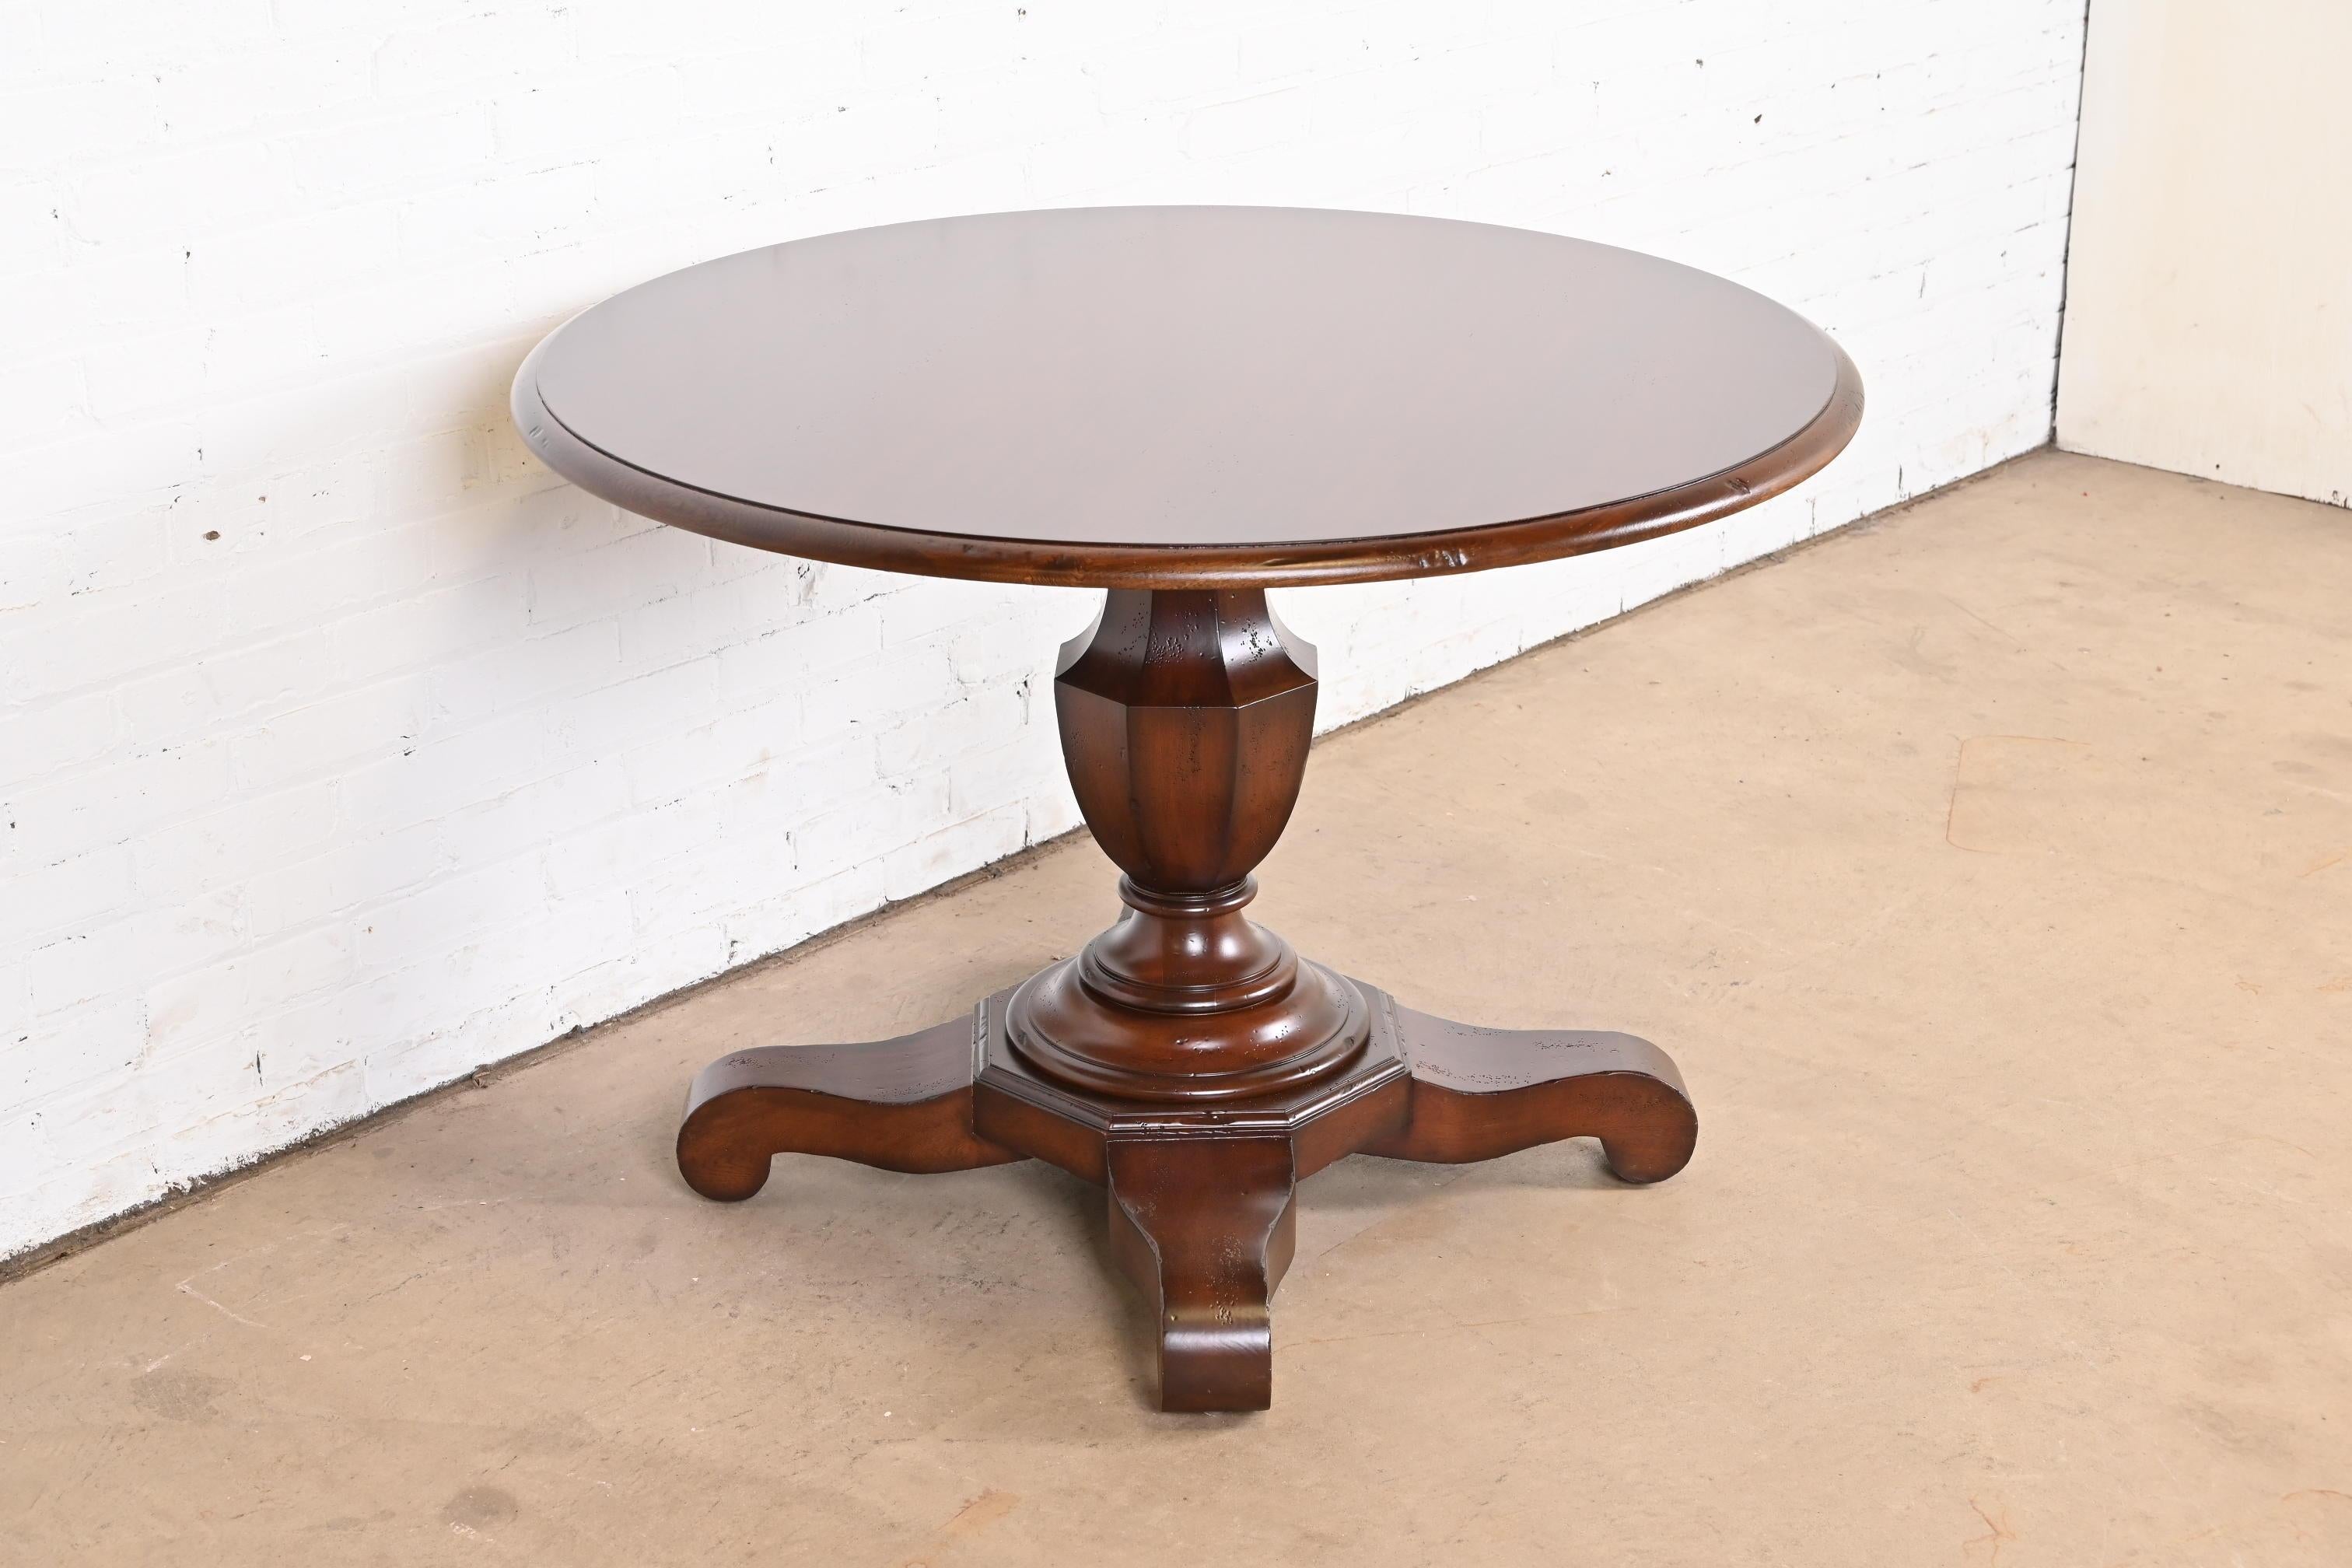 Baker Furniture Empire Carved Mahogany Pedestal Breakfast Table or Center Table 1